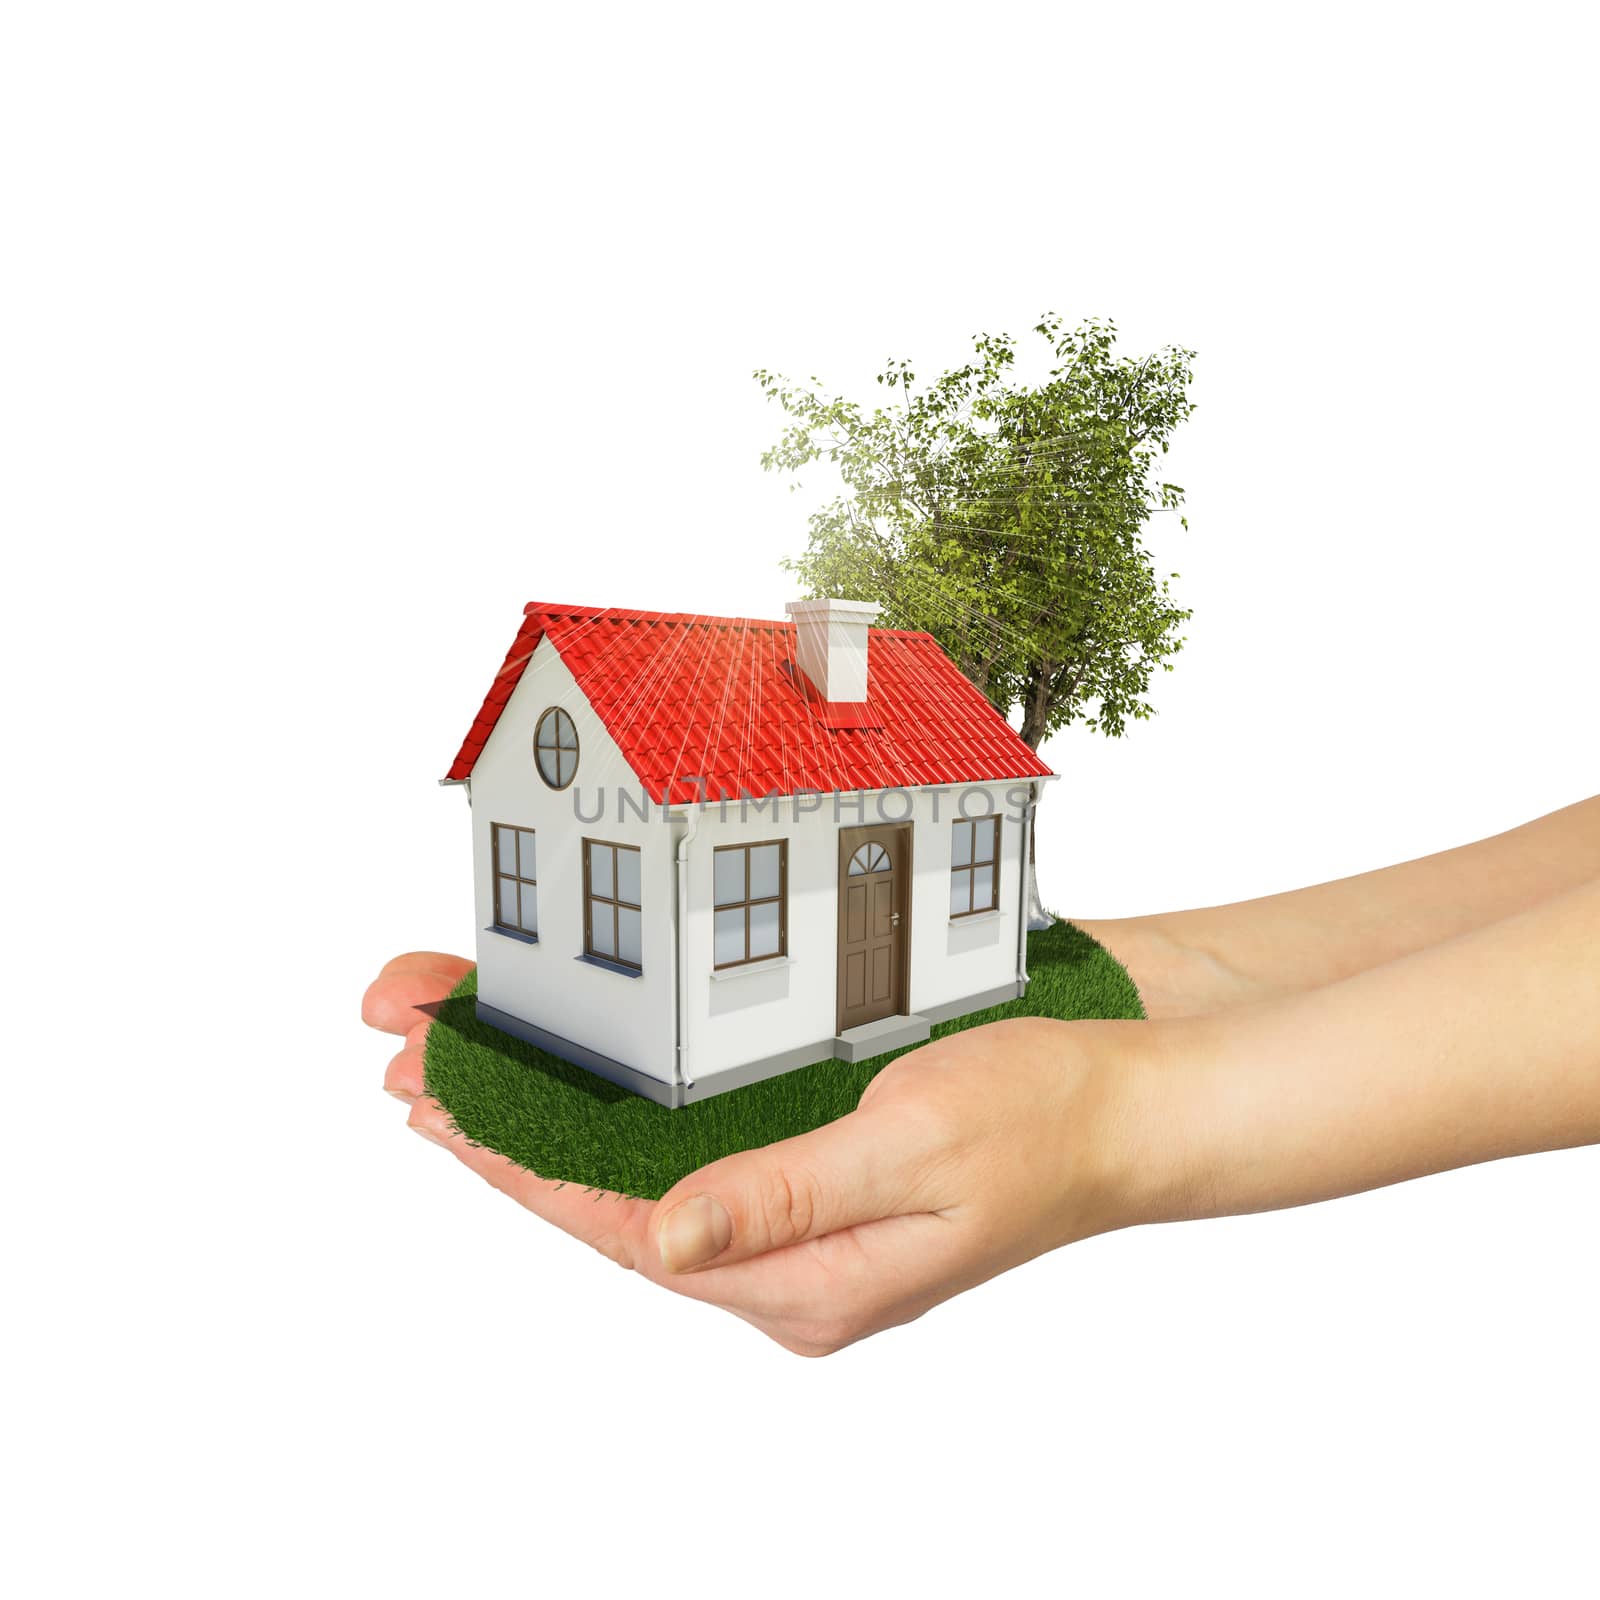 Human hands holding small house with tree and grass. Real estate concept